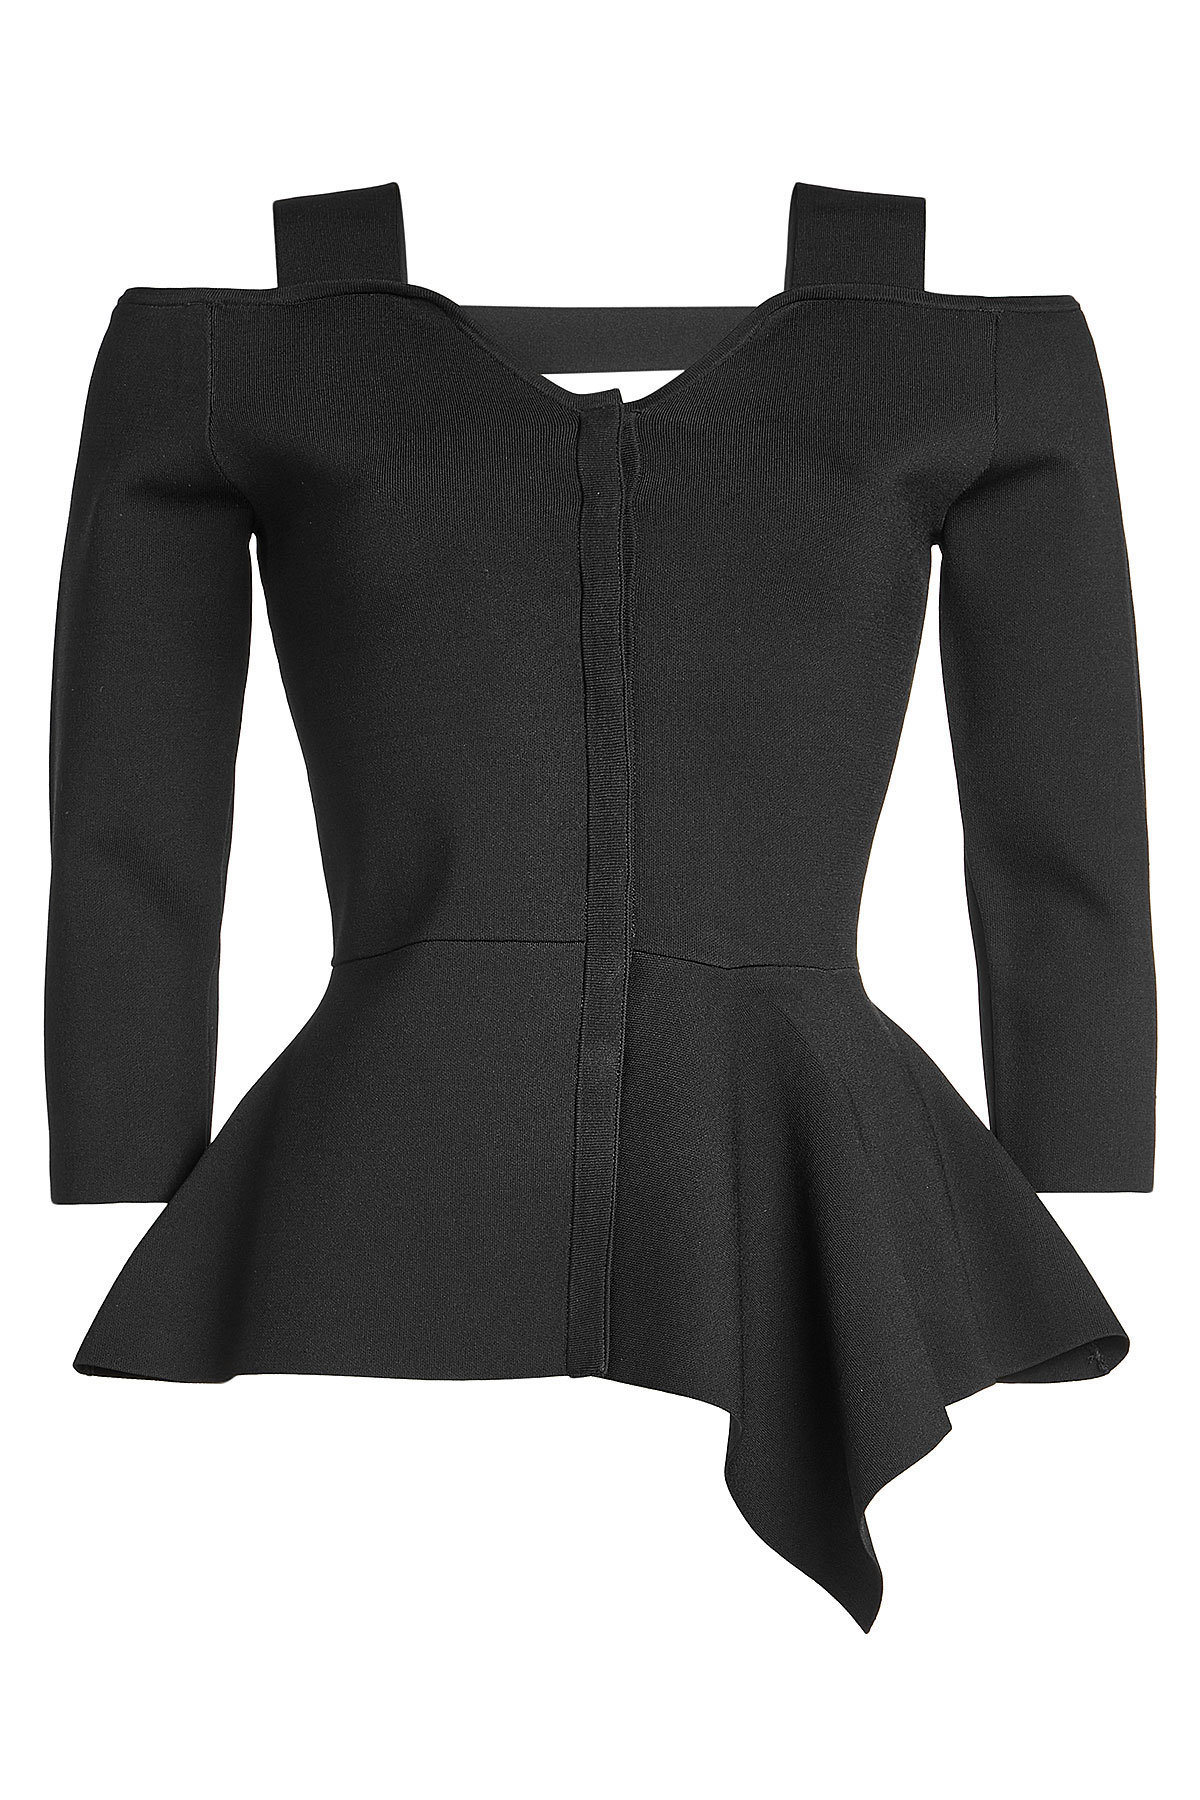 Roland Mouret - Knitted Jacket with Cut-Out Detail